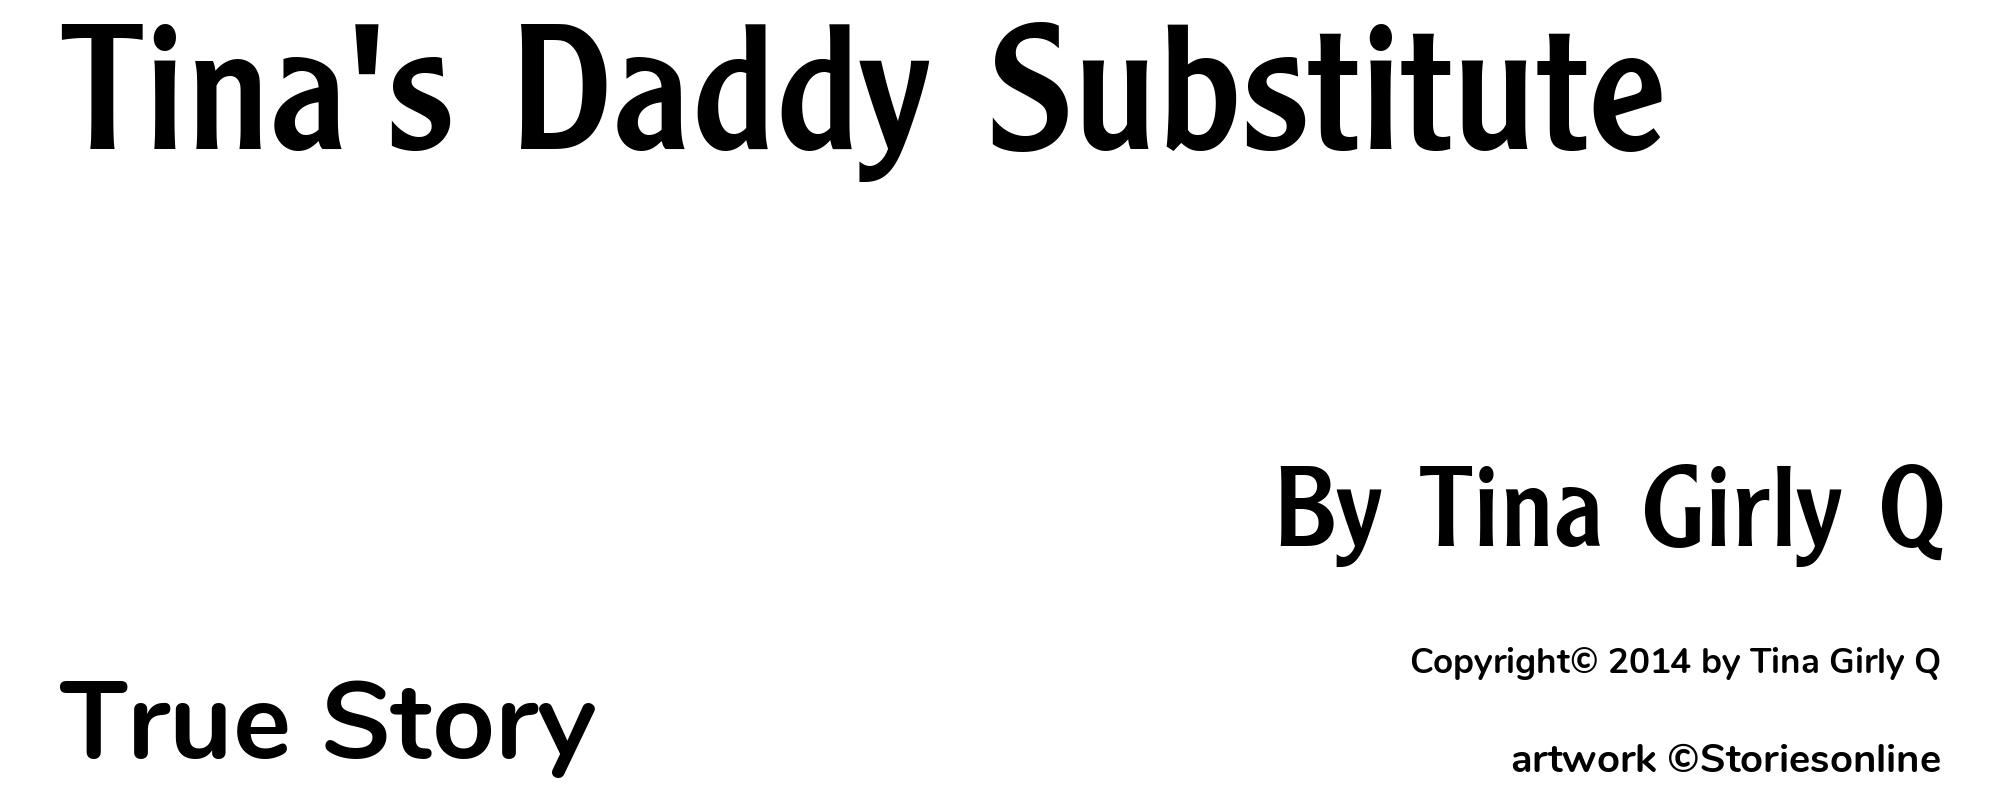 Tina's Daddy Substitute - Cover